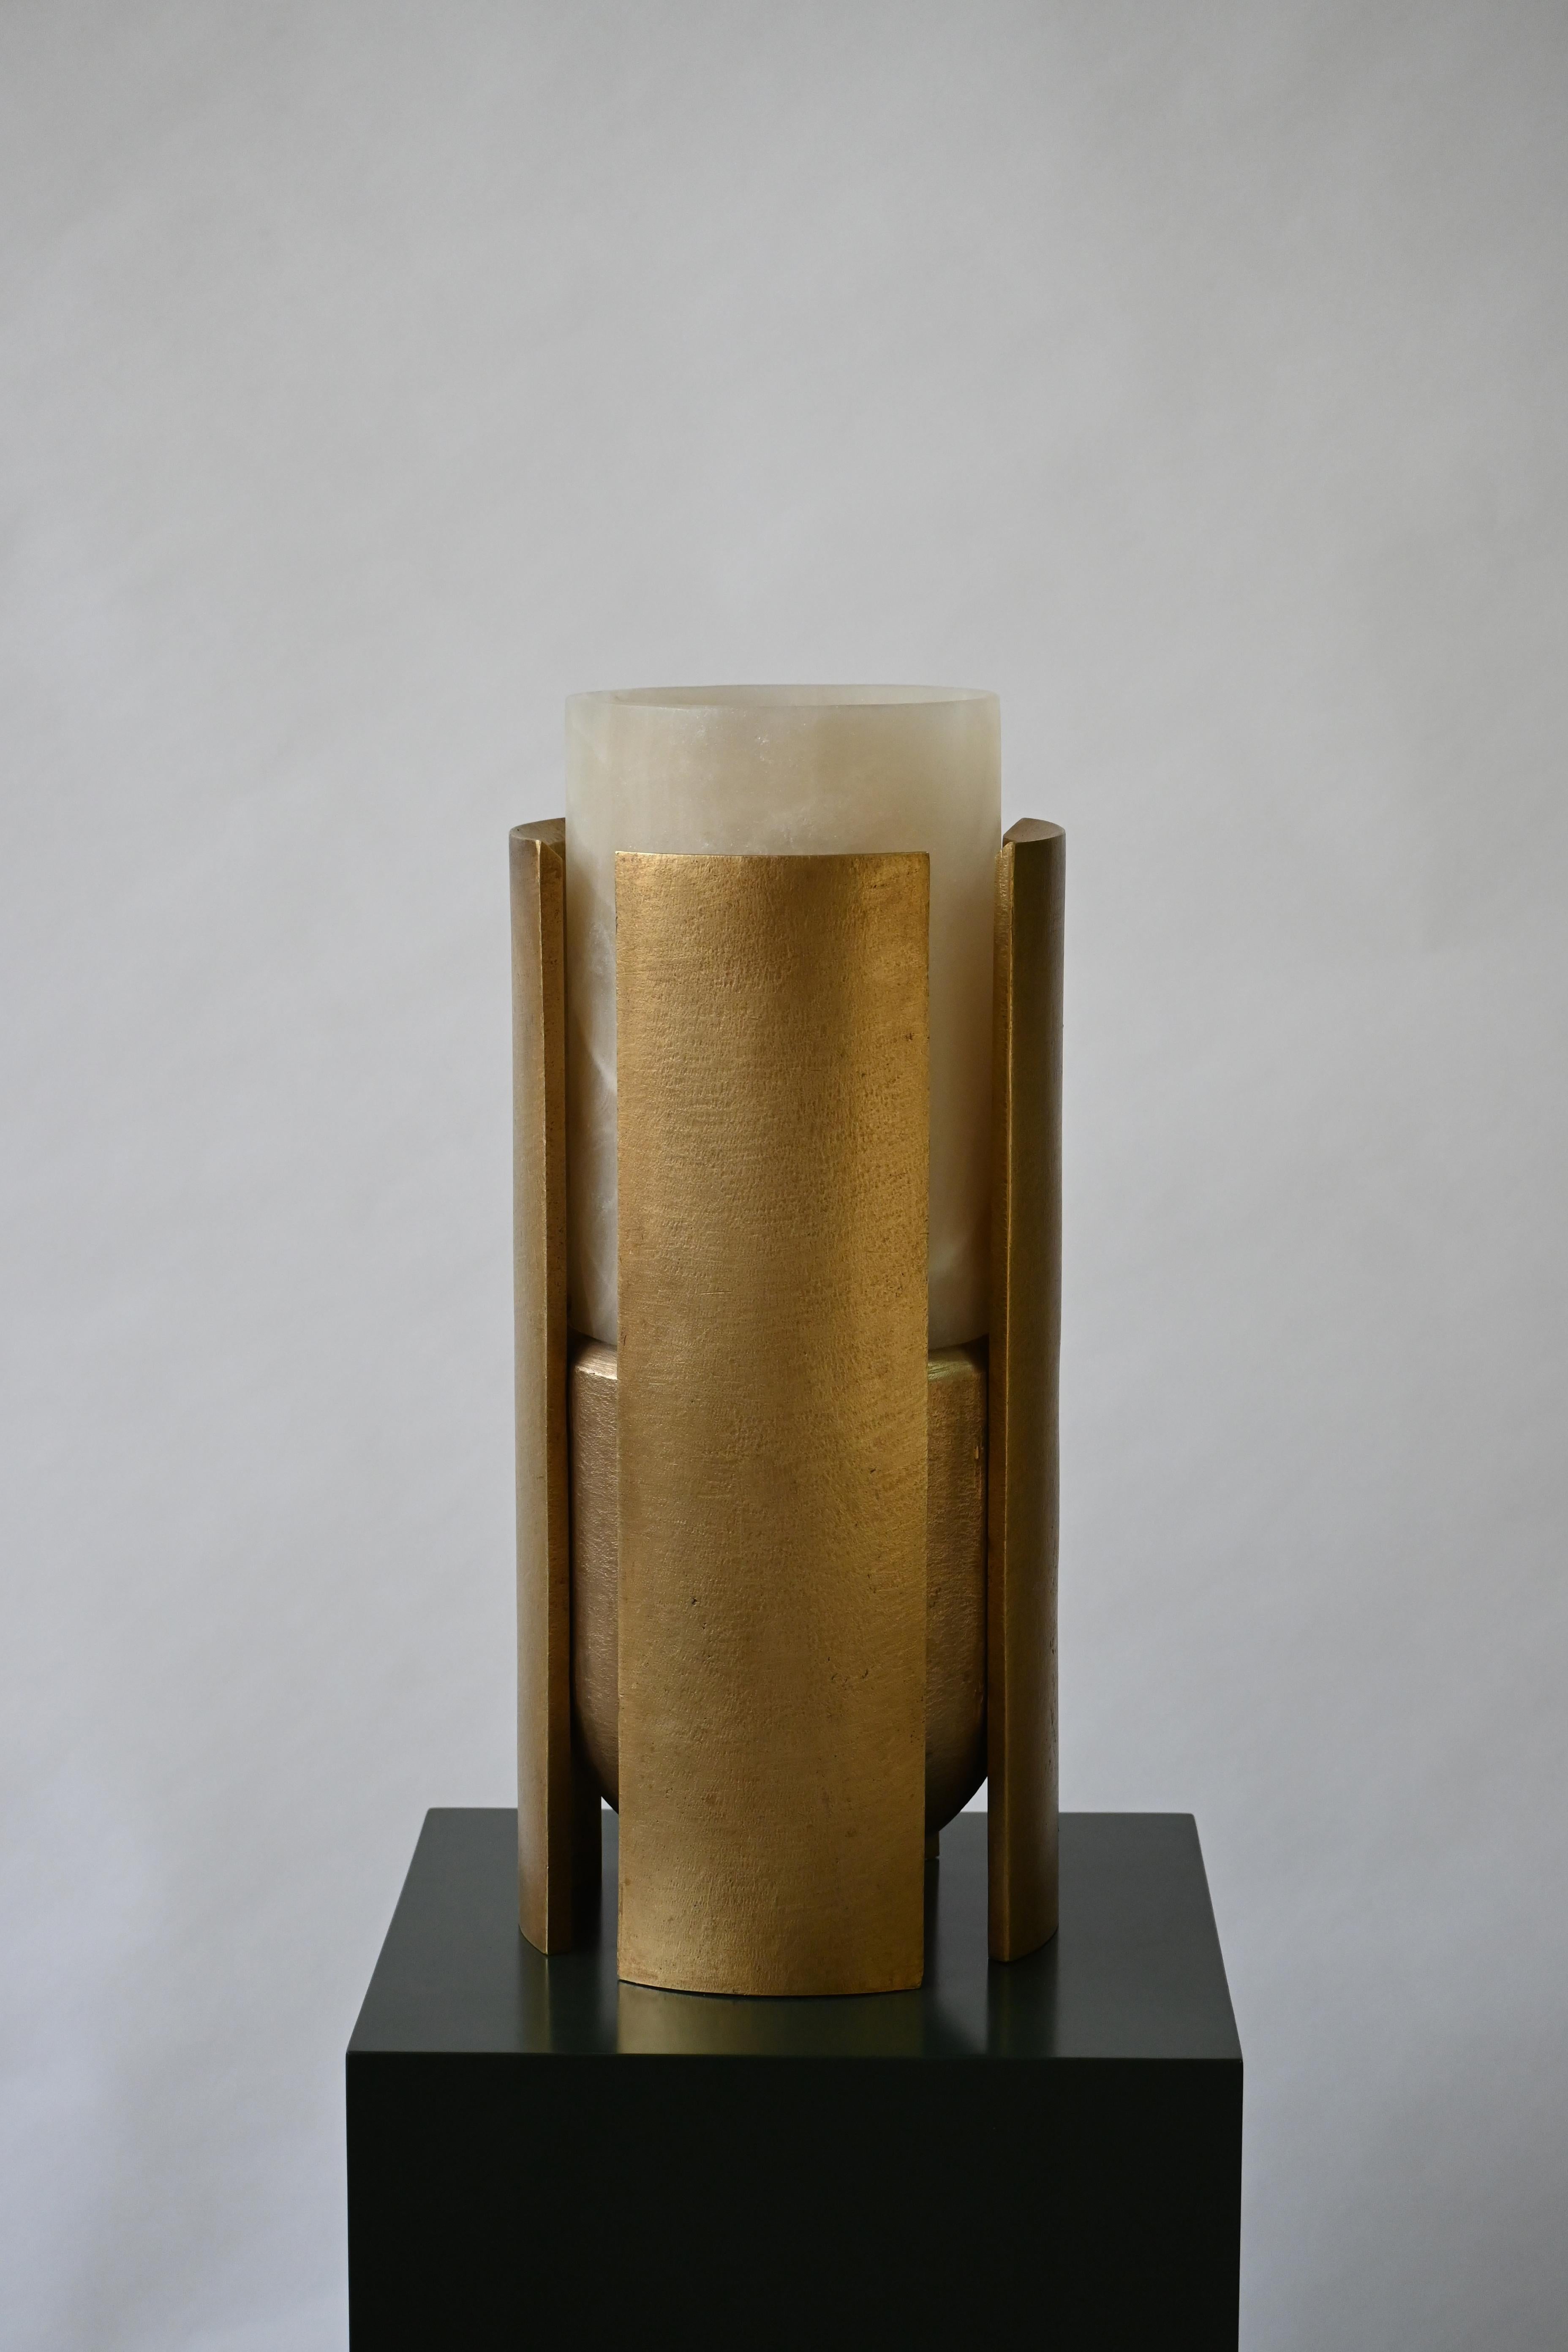 Runa Series Bronze Sculptural Vase 
By Deceres Studio
San Luis onyx and casted bronze
Limited Edition of 3
22D x 50H cm 
8.6D x 19.6H in

Runa is a sculptural vase inspired by ceremonial rituals of Latin America.
Elements of ceremonies, from the